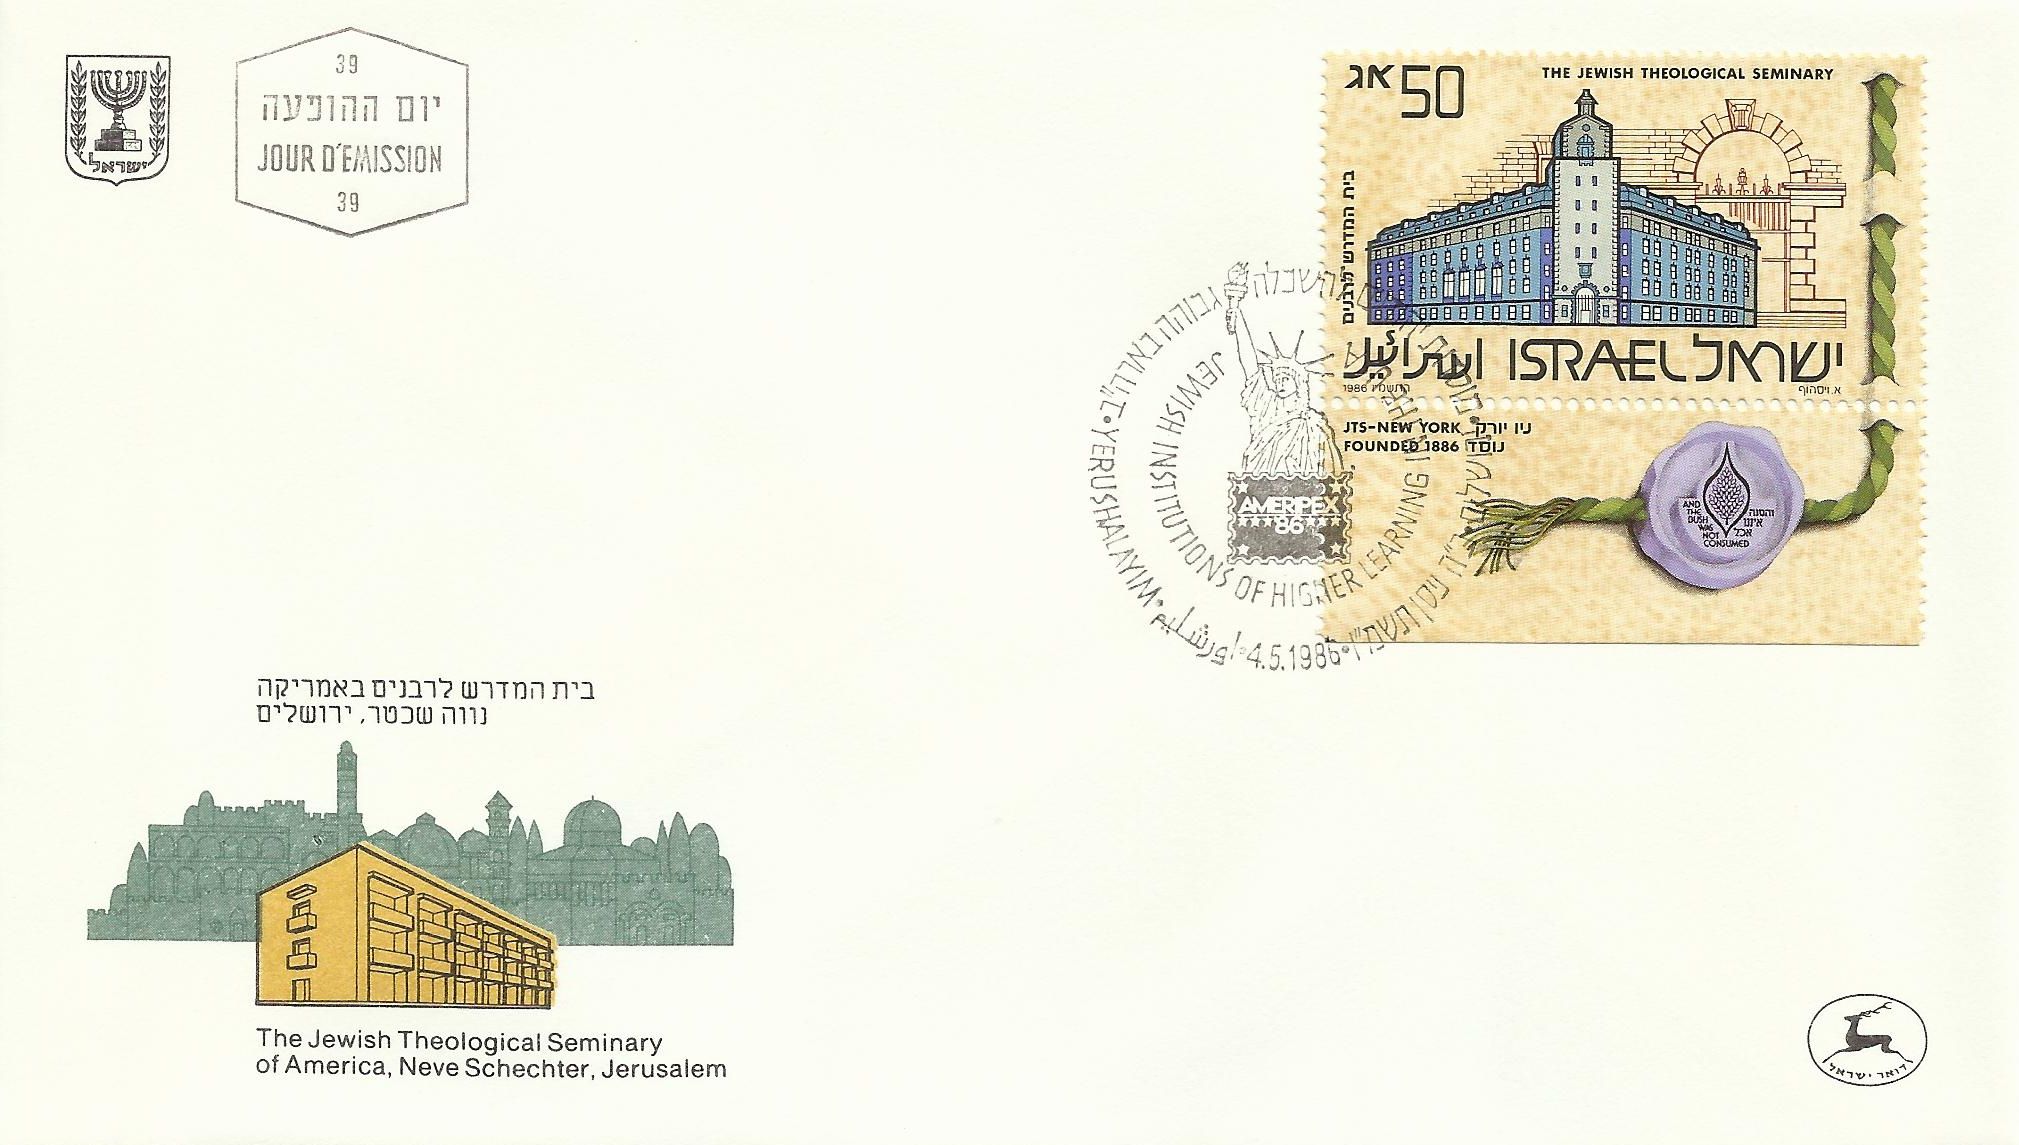 http://static.israelphilately.org.il/images/stamps/3230_L.jpg